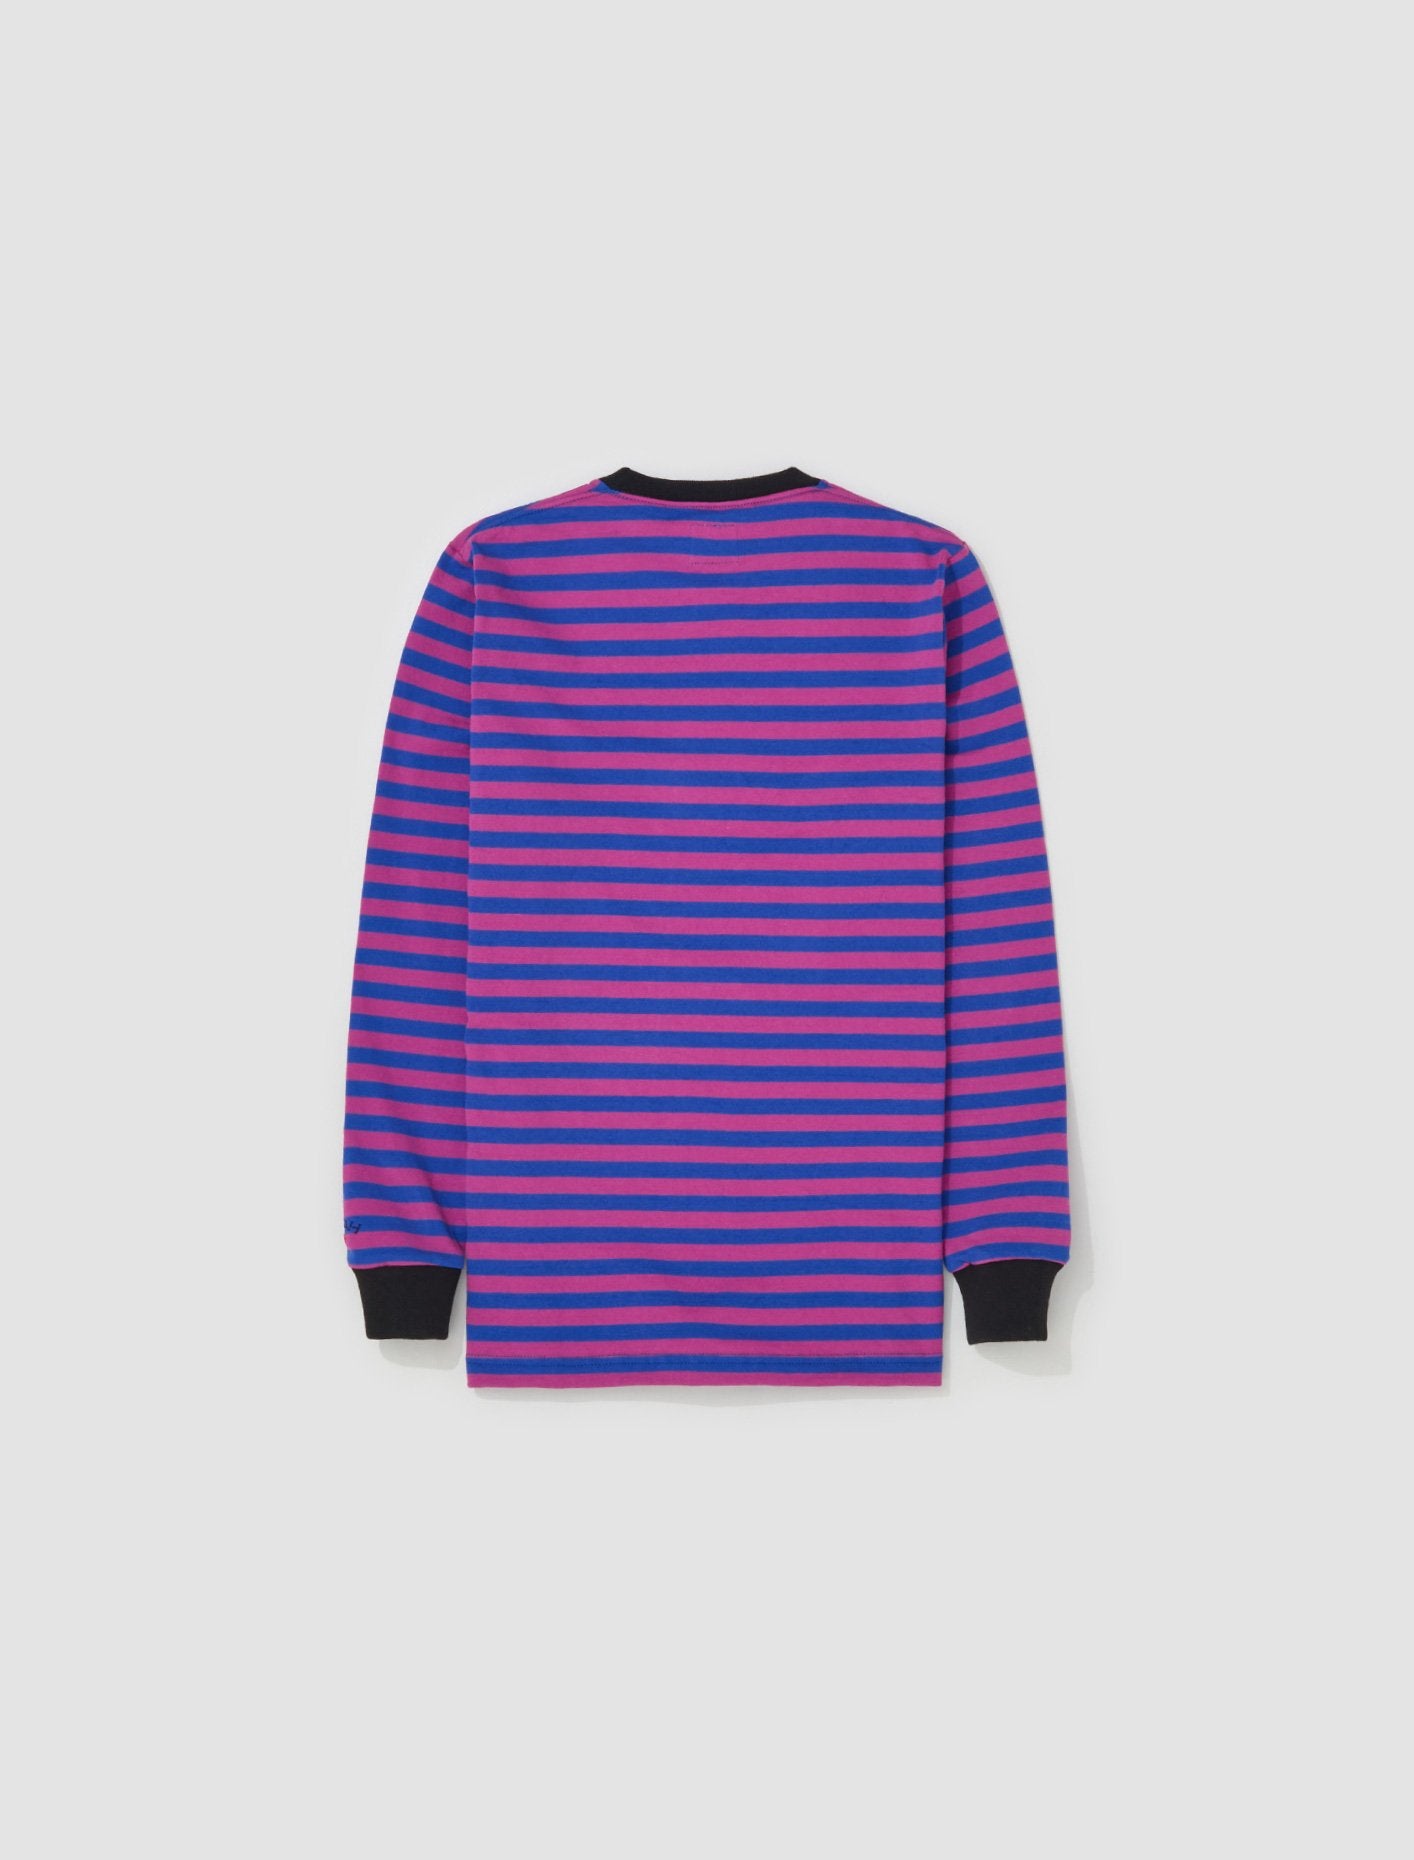 x The Cure Striped Top in Pink & Blue